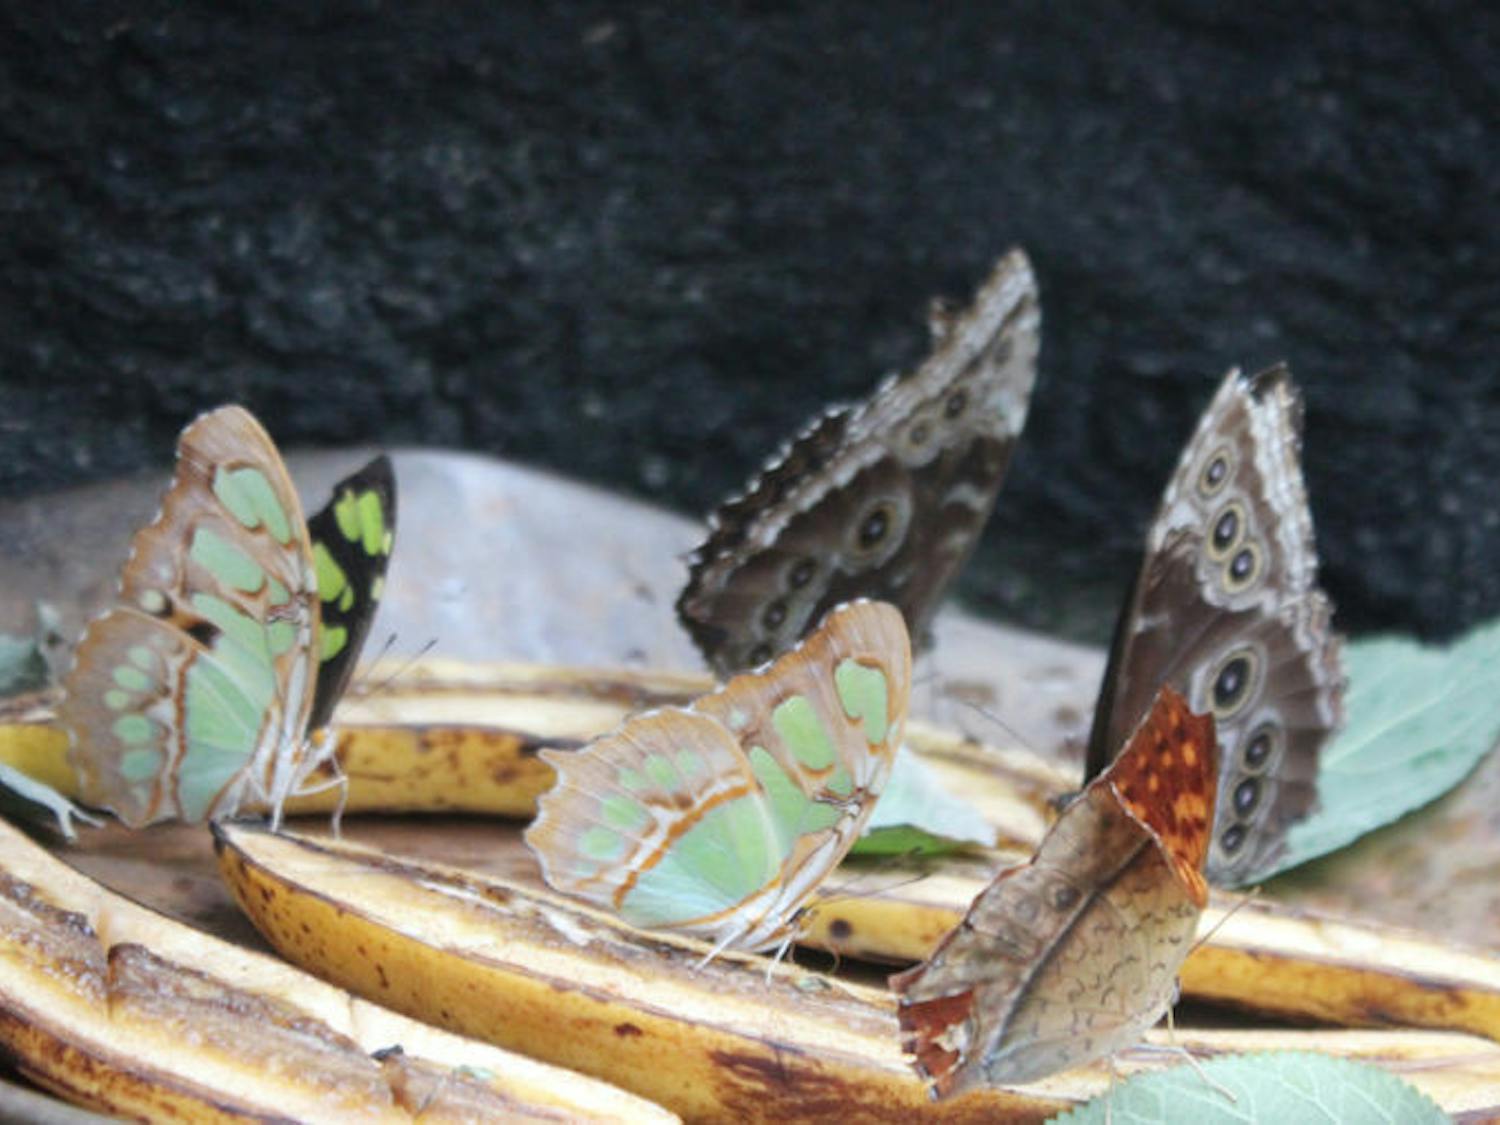 A group of butterflies eats bananas at the Butterfly Rainforest at the Florida Museum of Natural History.